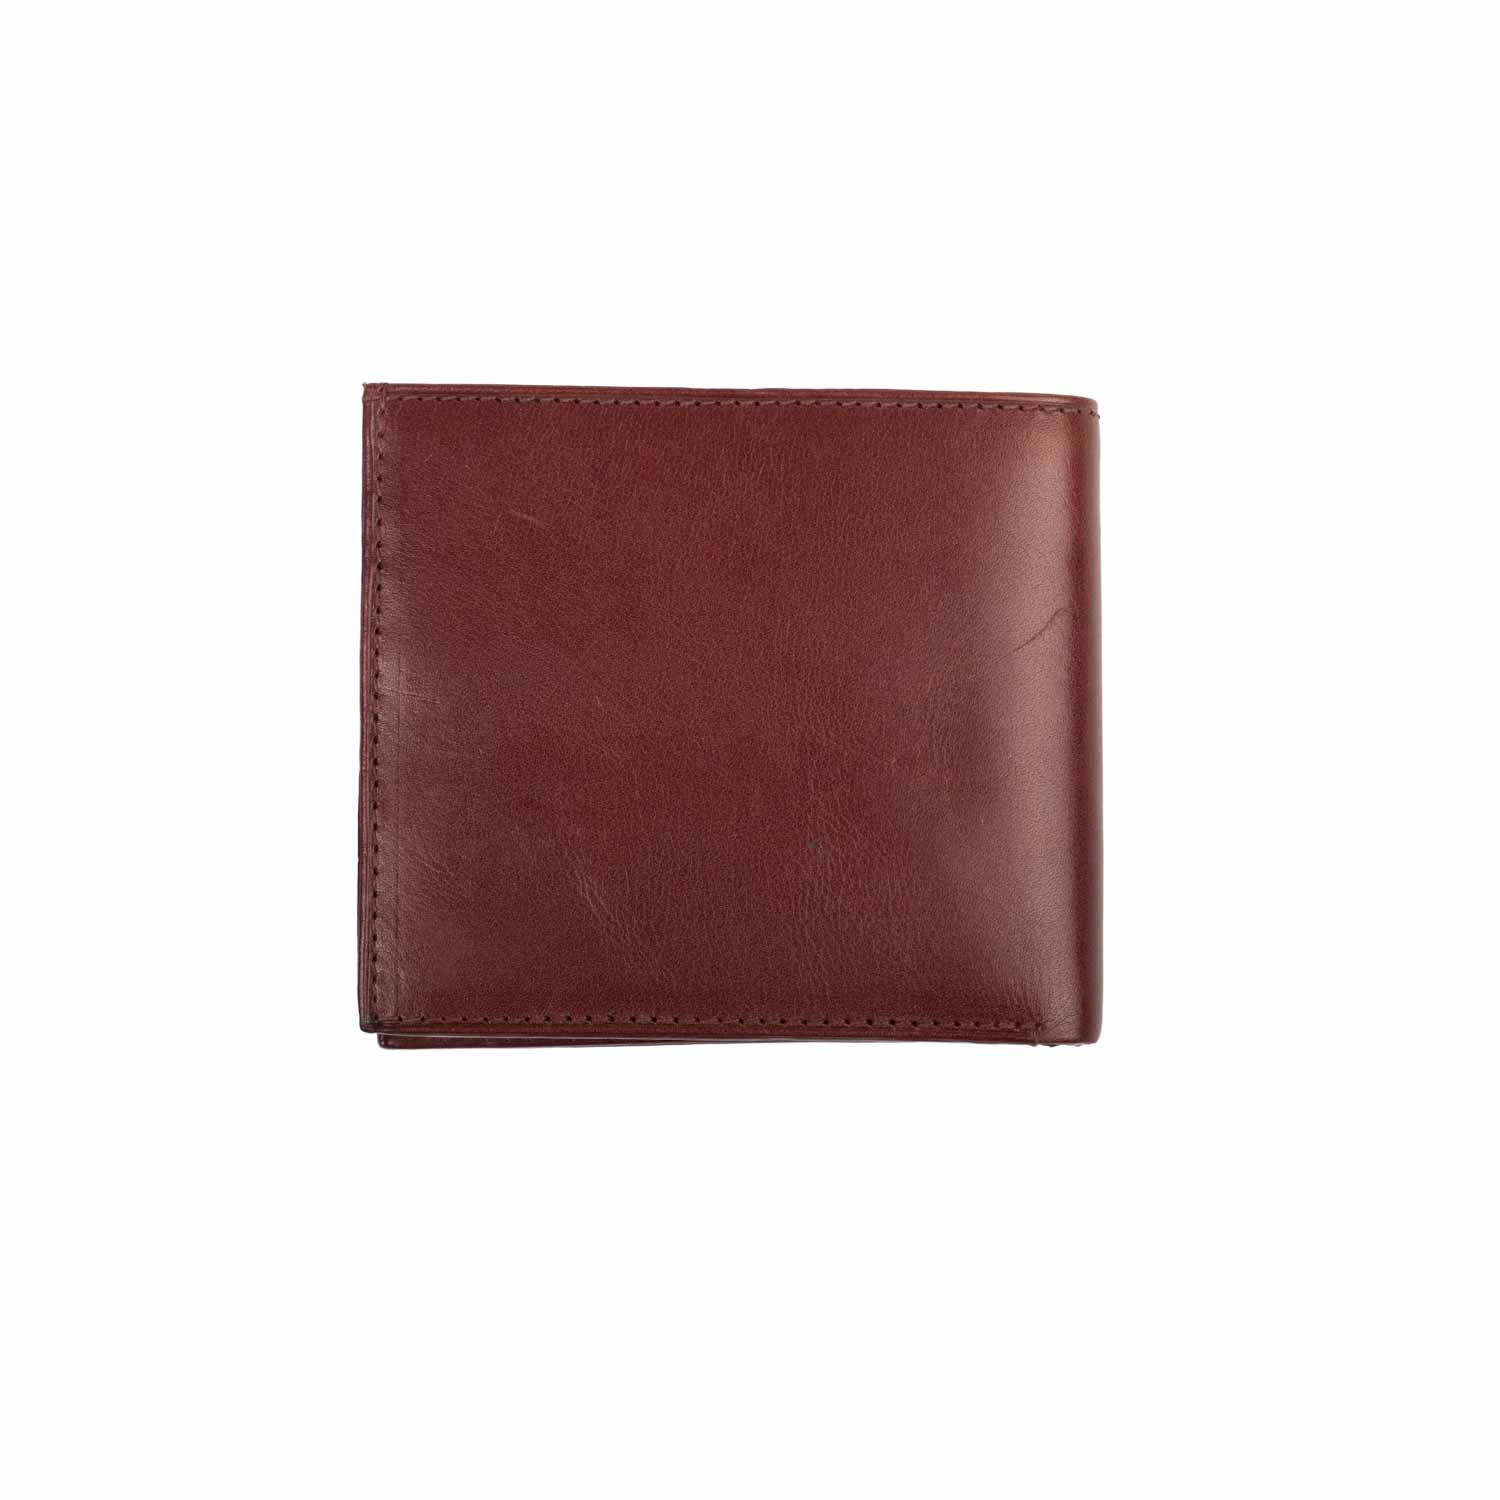 Men's Wallet With Coin Holder | MABU Leathers